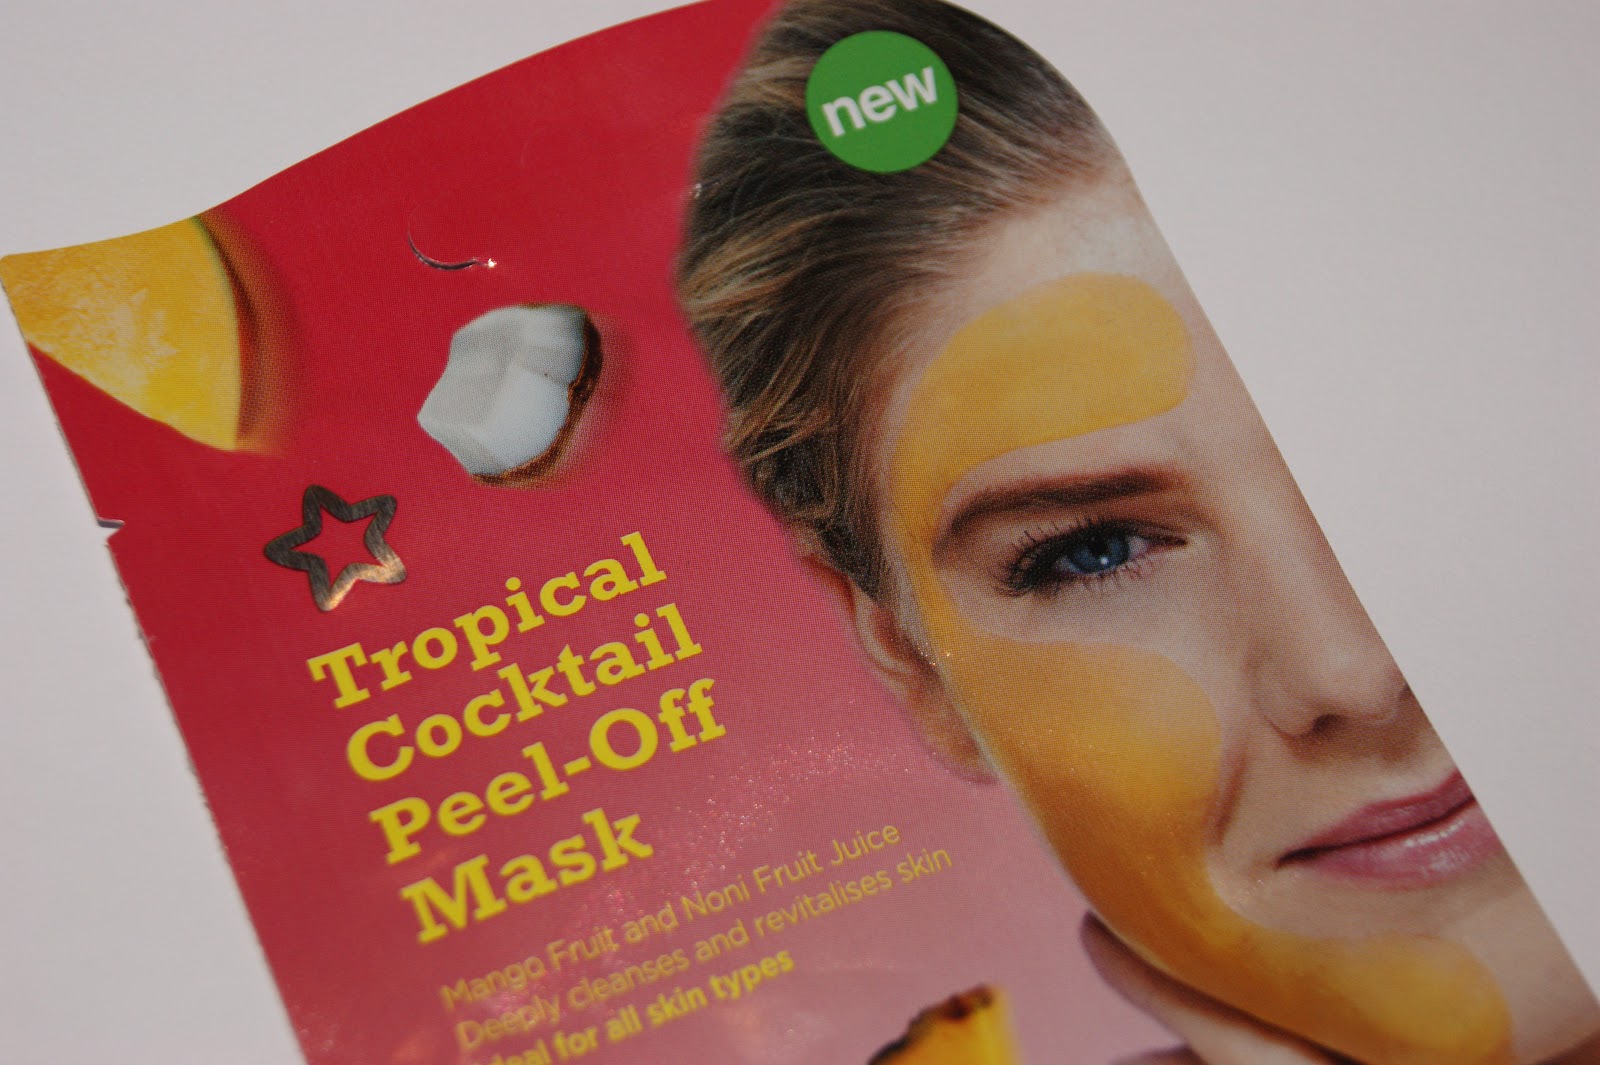 Superdrug Tropical Peel Off Facial Mask Review The Sunday Girl 004.jpg